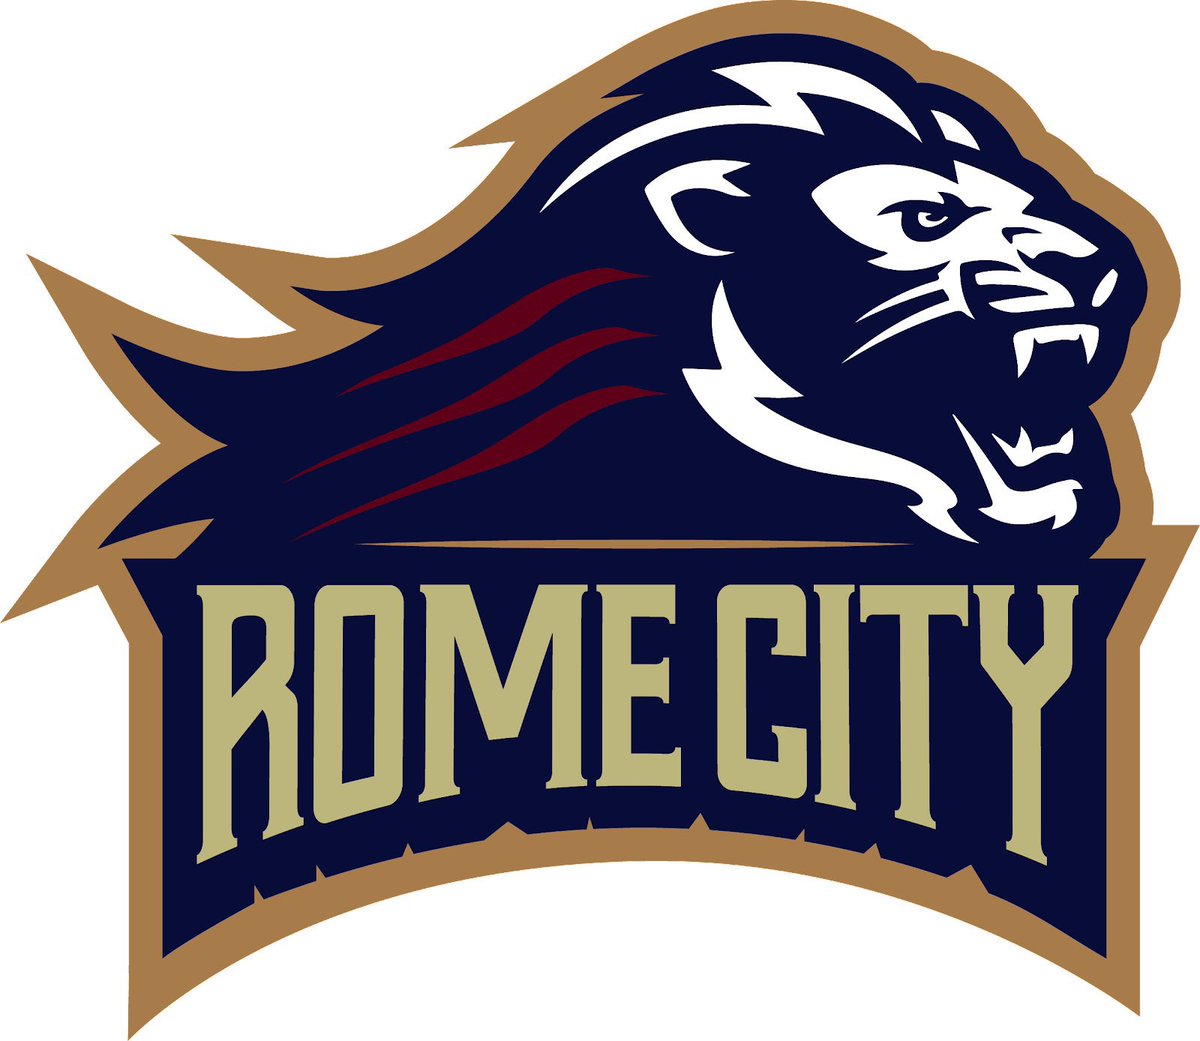 Extremely Blessed to receive my first offer to play overseas @RomeCityInst 🙏
#CollegeFootball 
#football